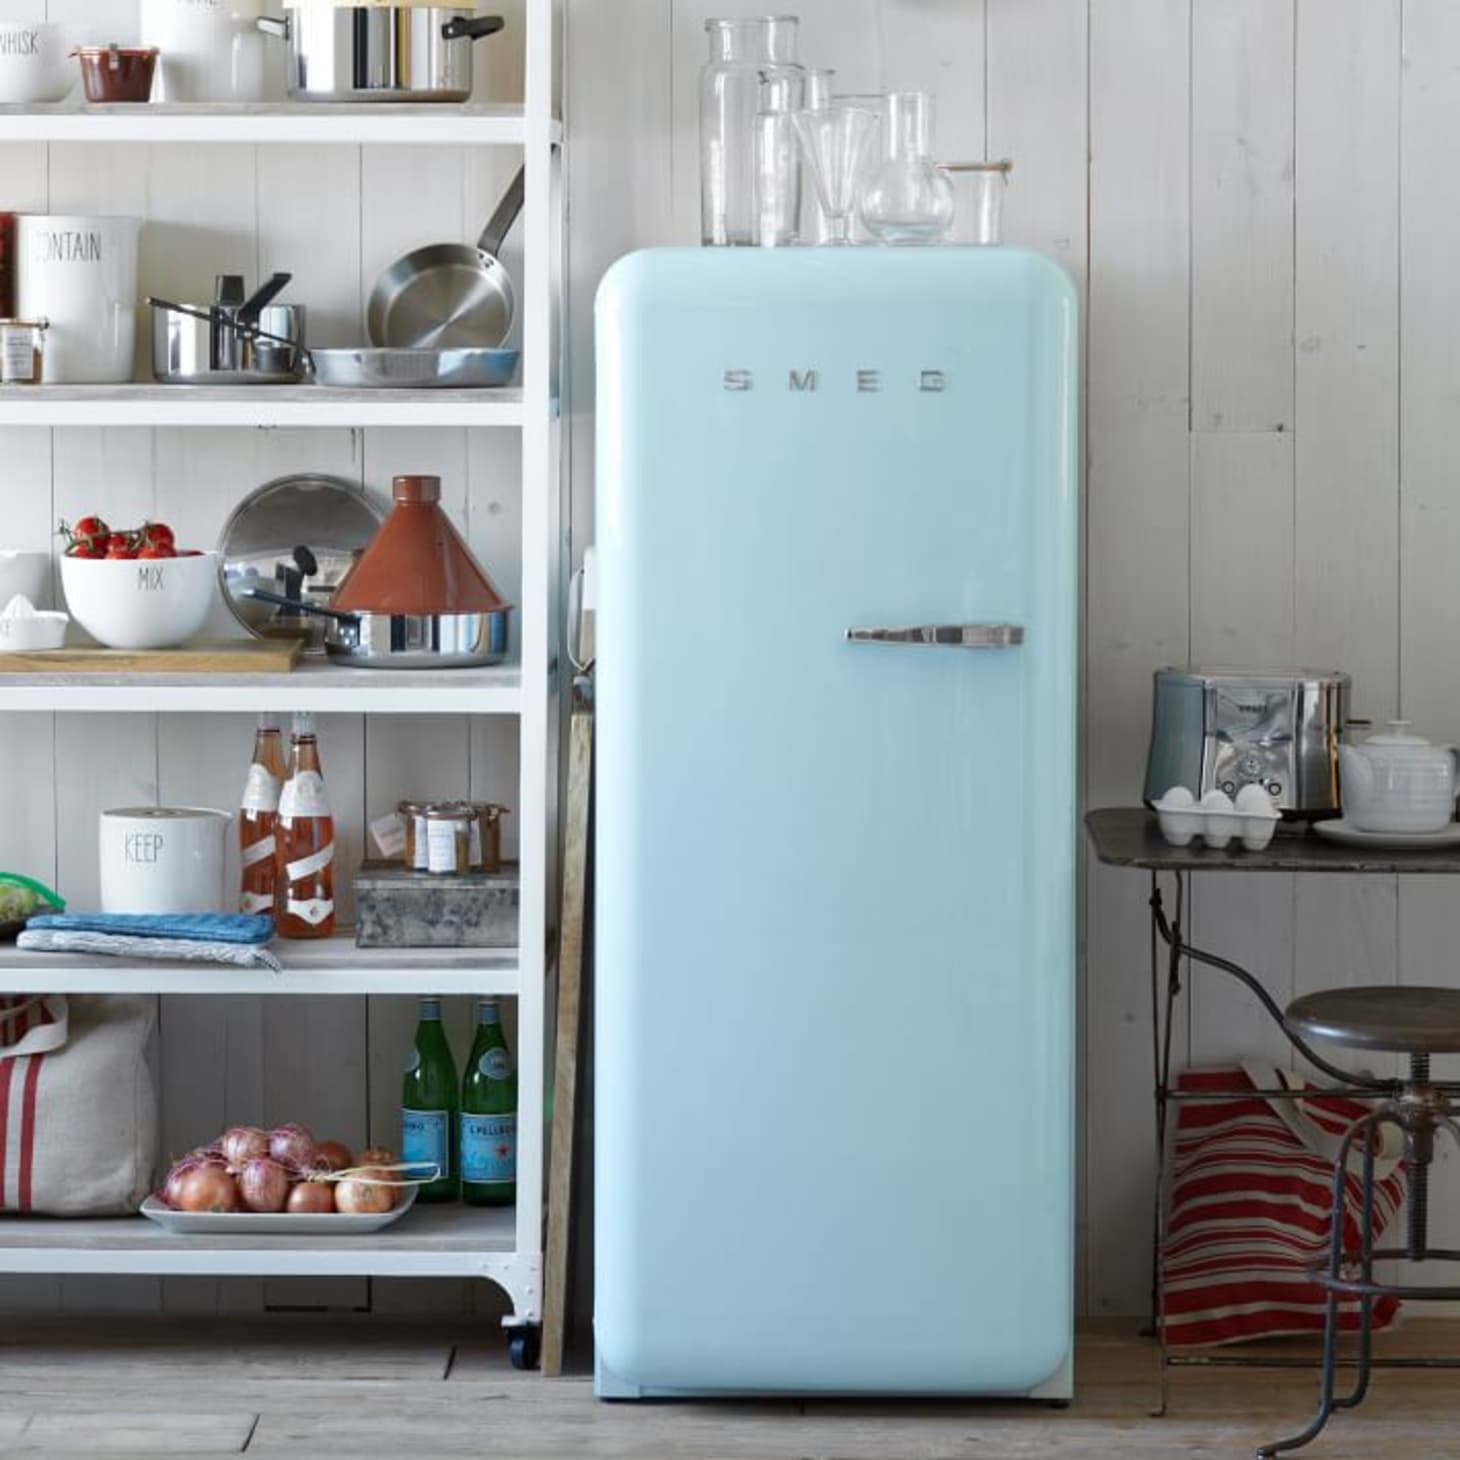 Top 10 CandyColored Refrigerators for the CoolestLooking